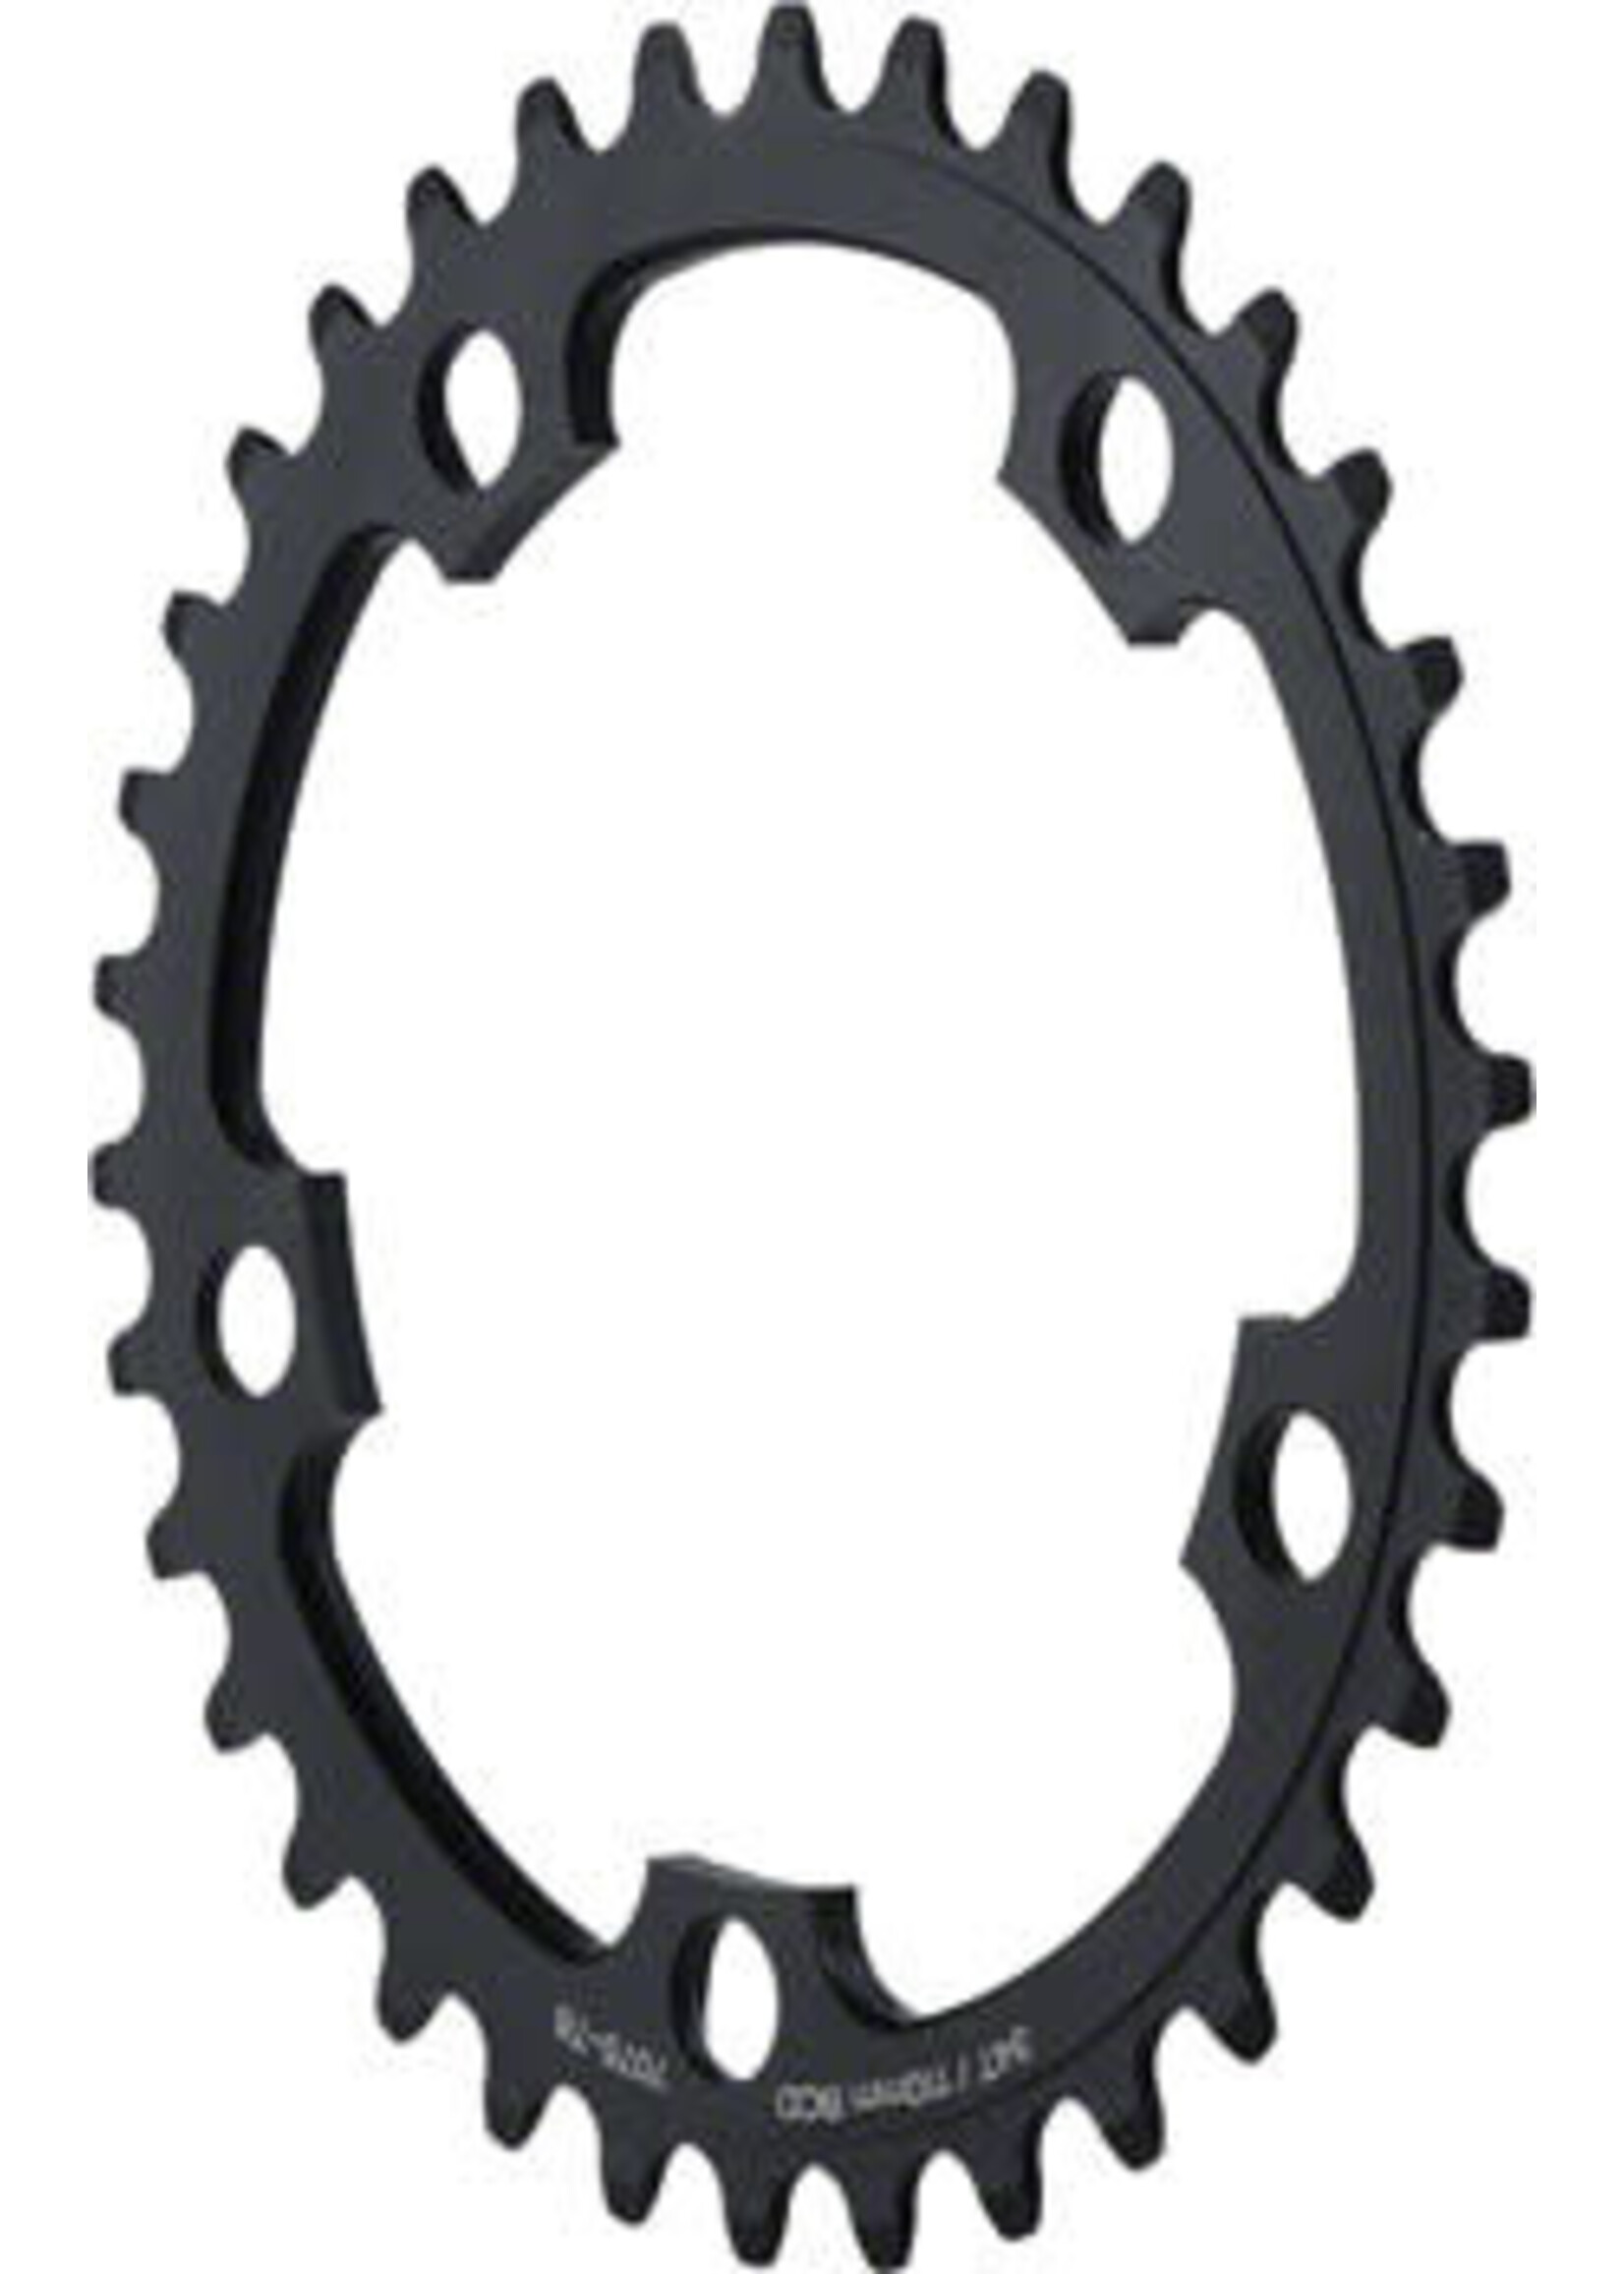 Dimension Dimension Chainring - 36T, 110mm BCD, Middle, Black